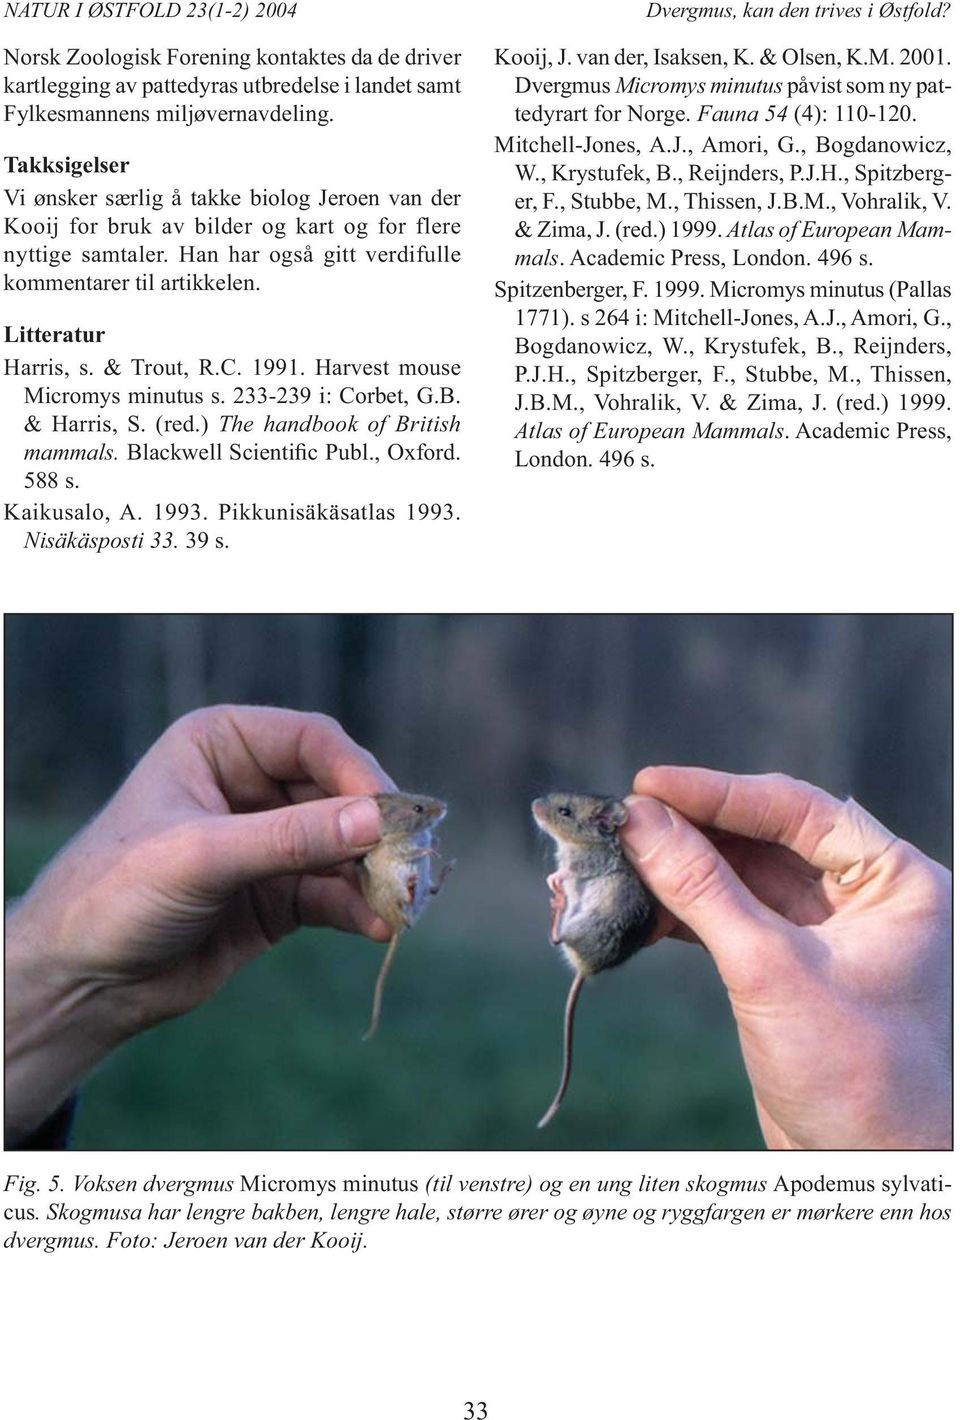 Litteratur Harris, s. & Trout, R.C. 1991. Harvest mouse Micromys minutus s. 233-239 i: Corbet, G.B. & Harris, S. (red.) The handbook of British mammals. Blackwell Scientific Publ., Oxford. 588 s.